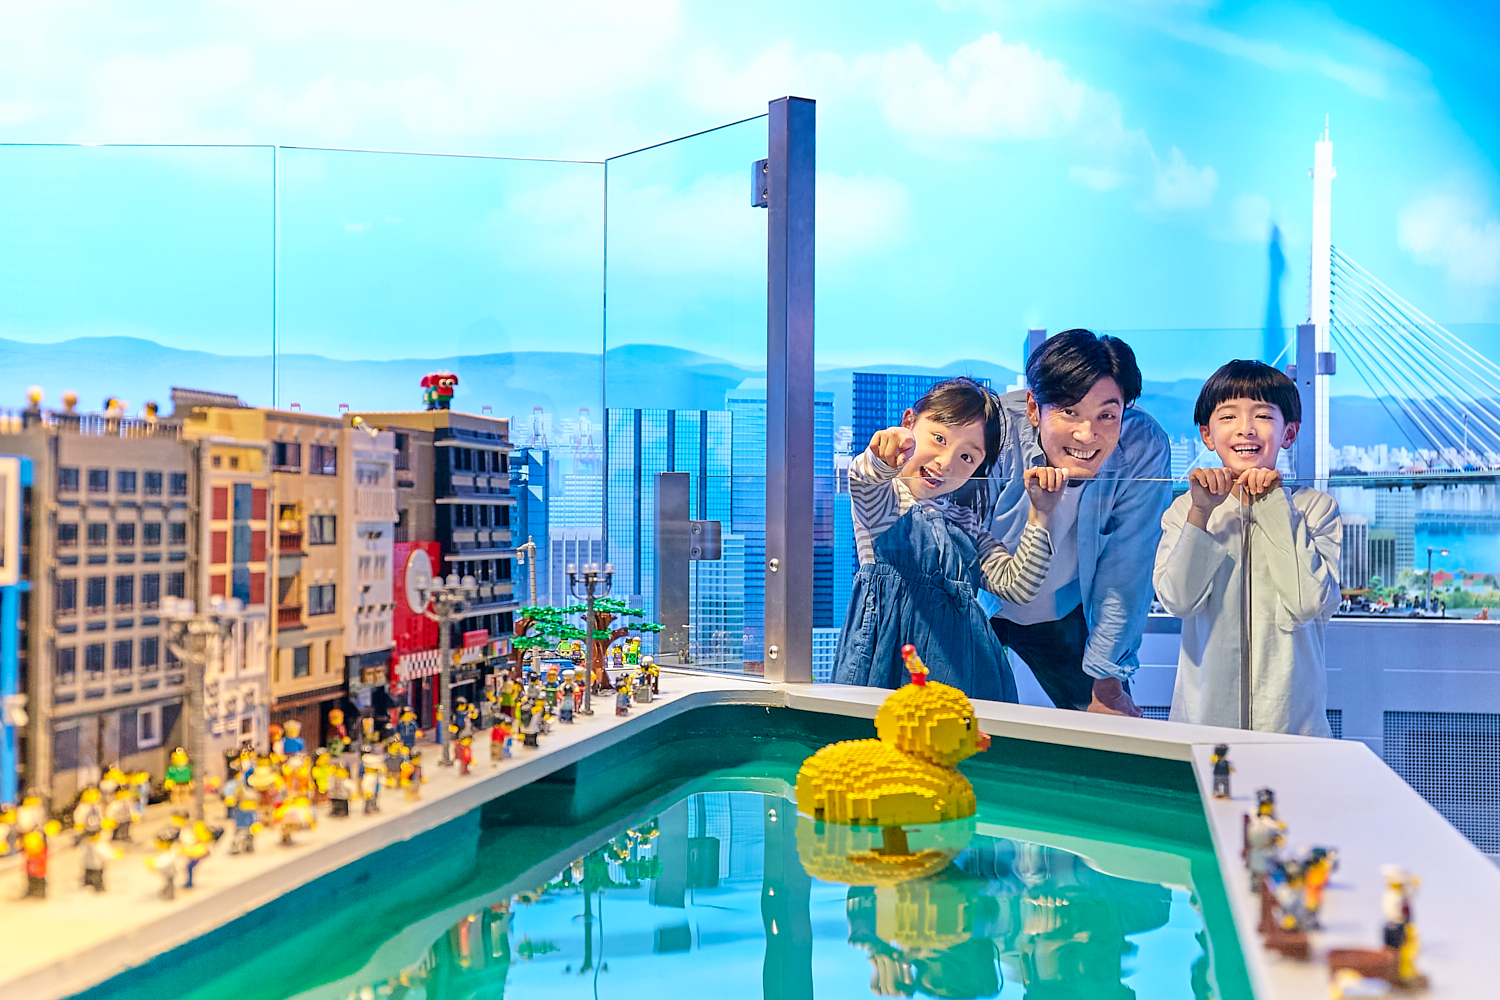 Learn about, see, and experience how much fun LEGO® bricks can be in this theme park filled with hands-on attractions!  The LEGOLAND Discovery Center Osaka is an indoor LEGO® theme park where visitors are surrounded by over 3 million LEGO® bricks.